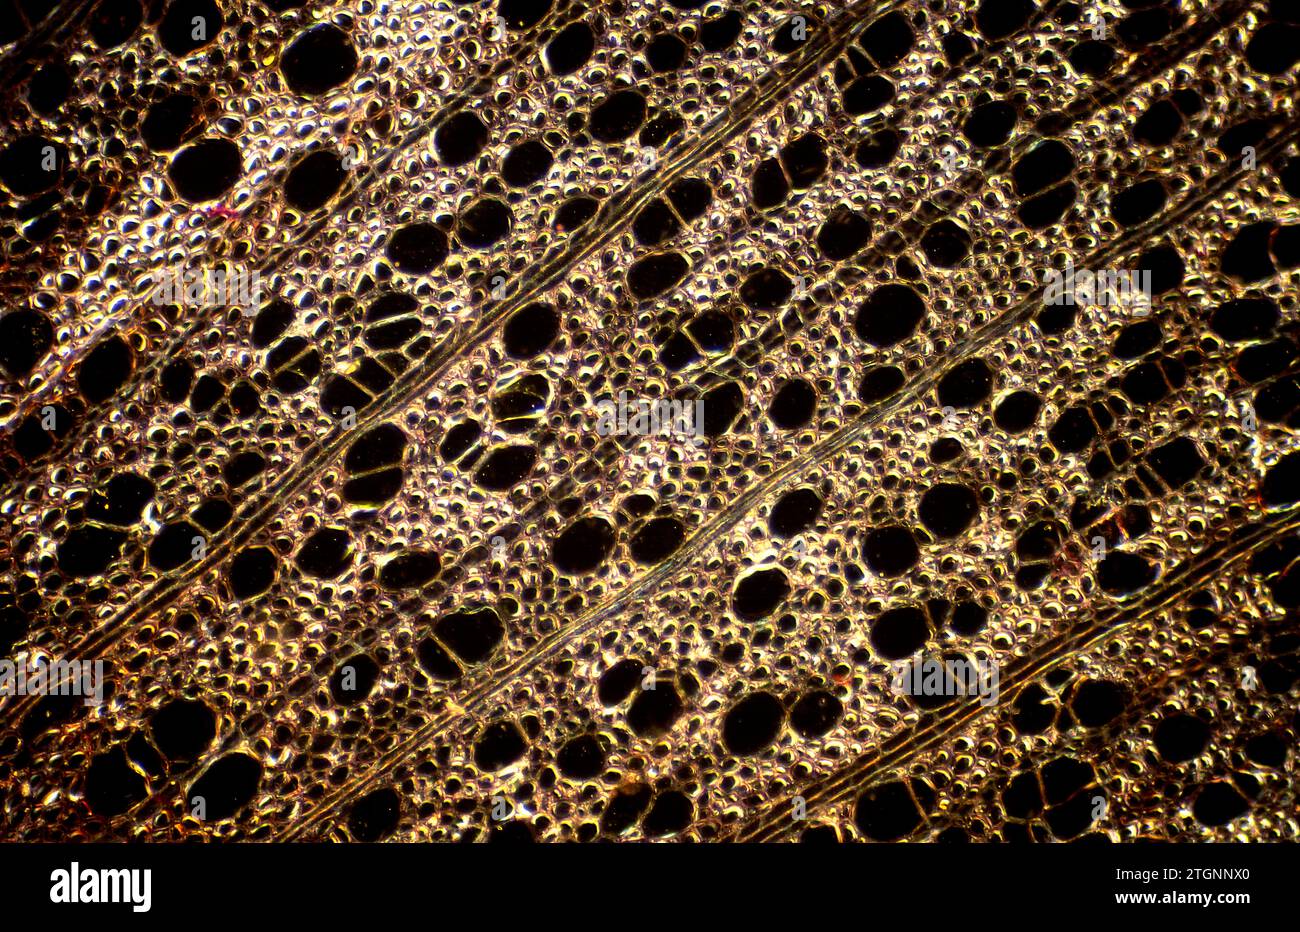 Stem cross section showing secundary xylem and radial parenchima. Photomicrograph dark background. Stock Photo